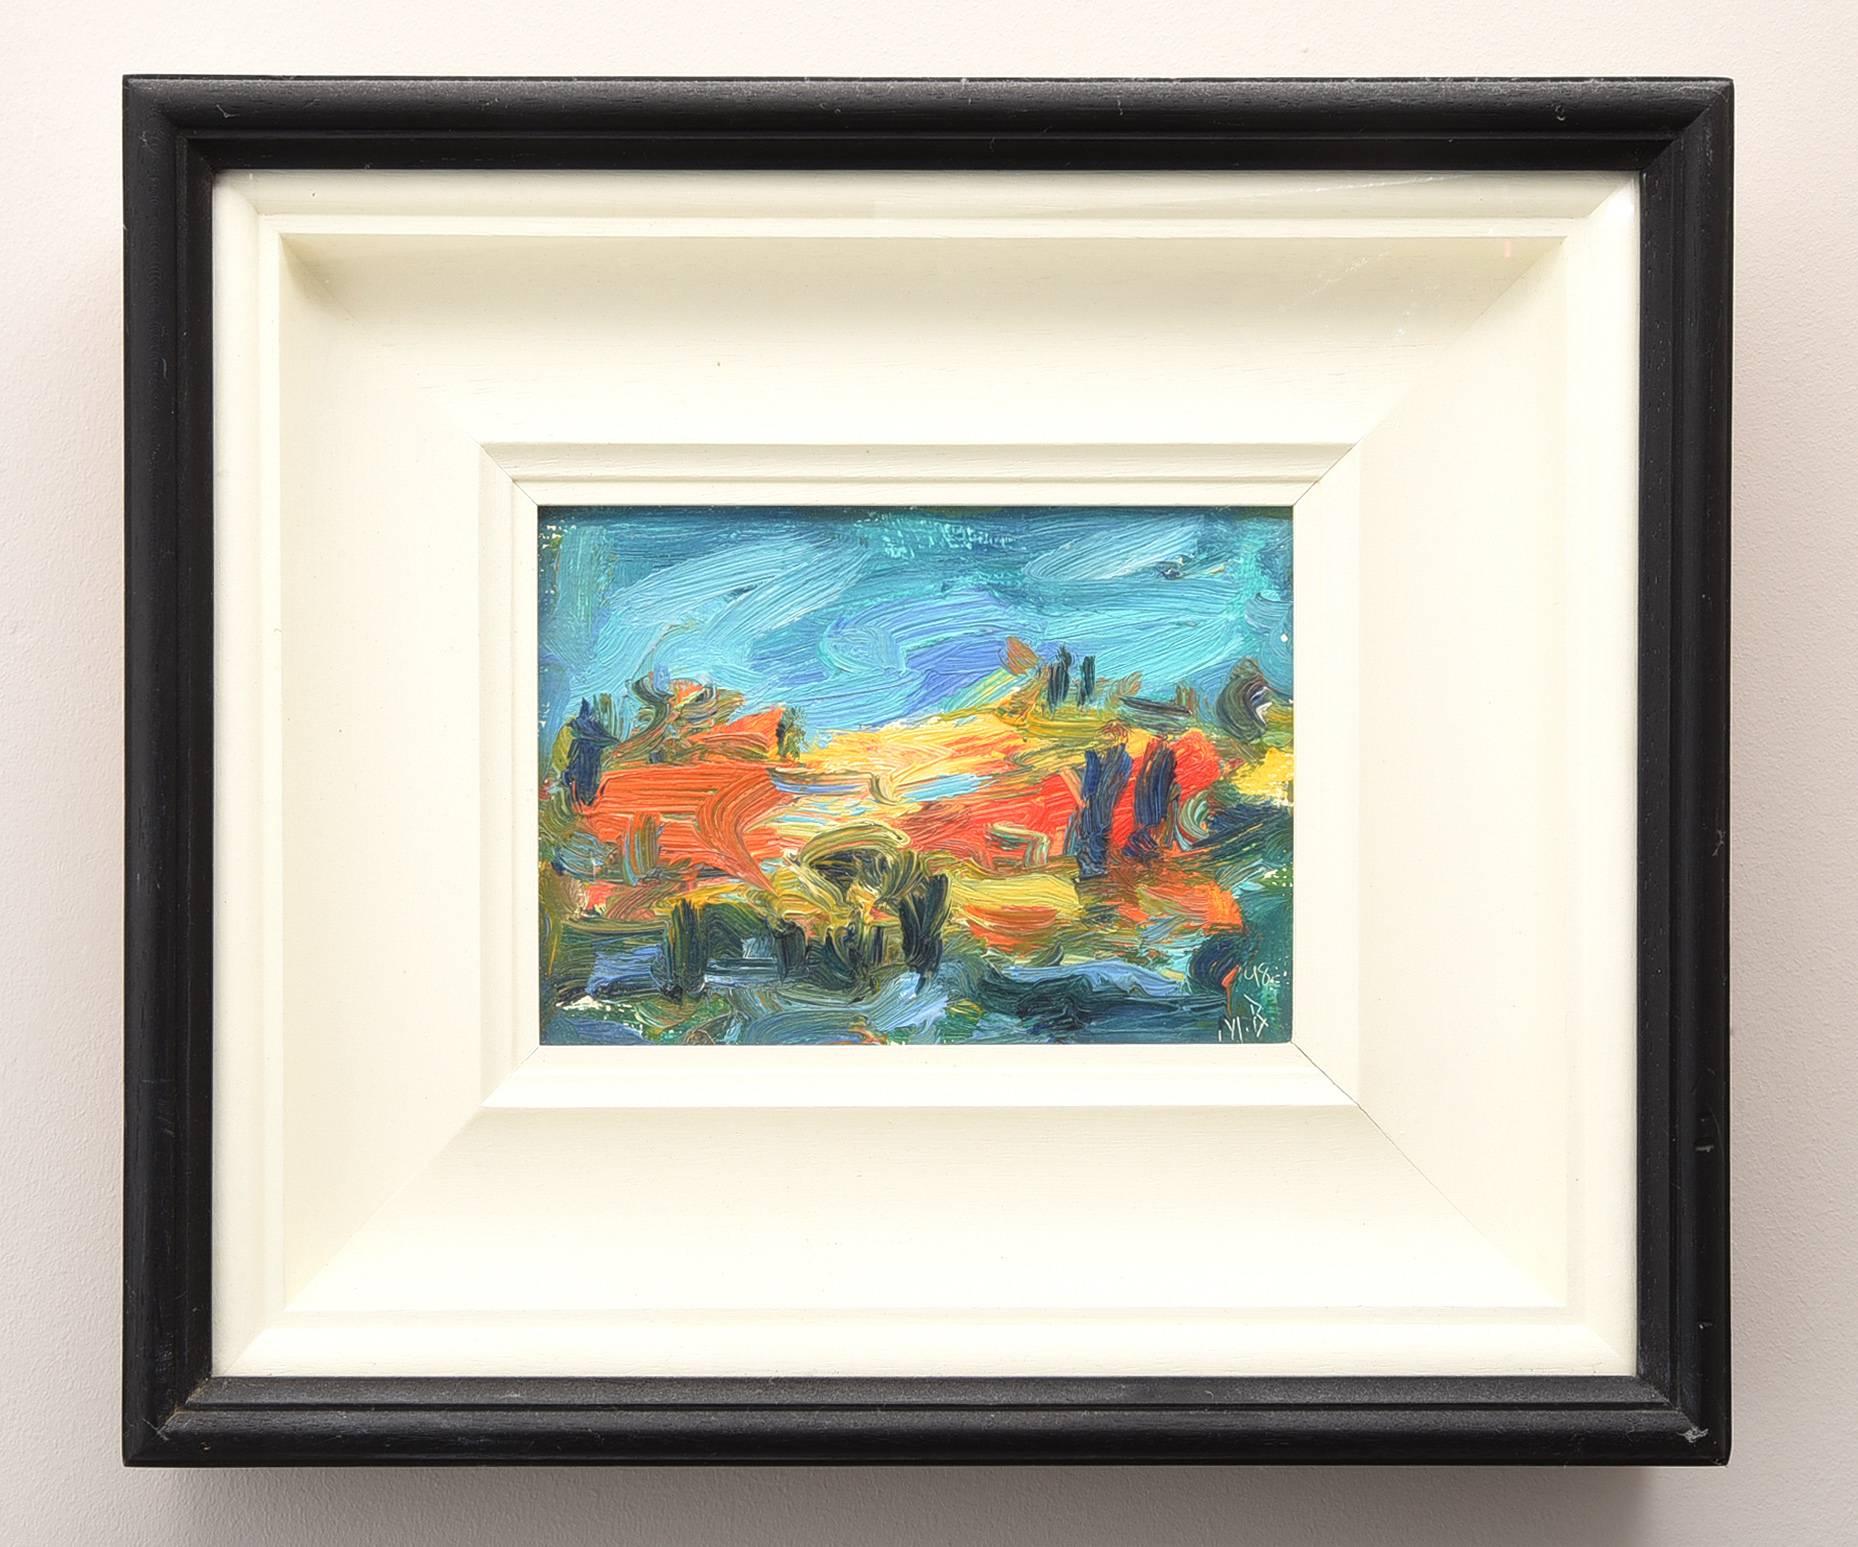 Oil on board
Signed in Mono (dated 96')
Framed
Measures: 4.5 x 7 inches (11.5 x 14 inches framed).